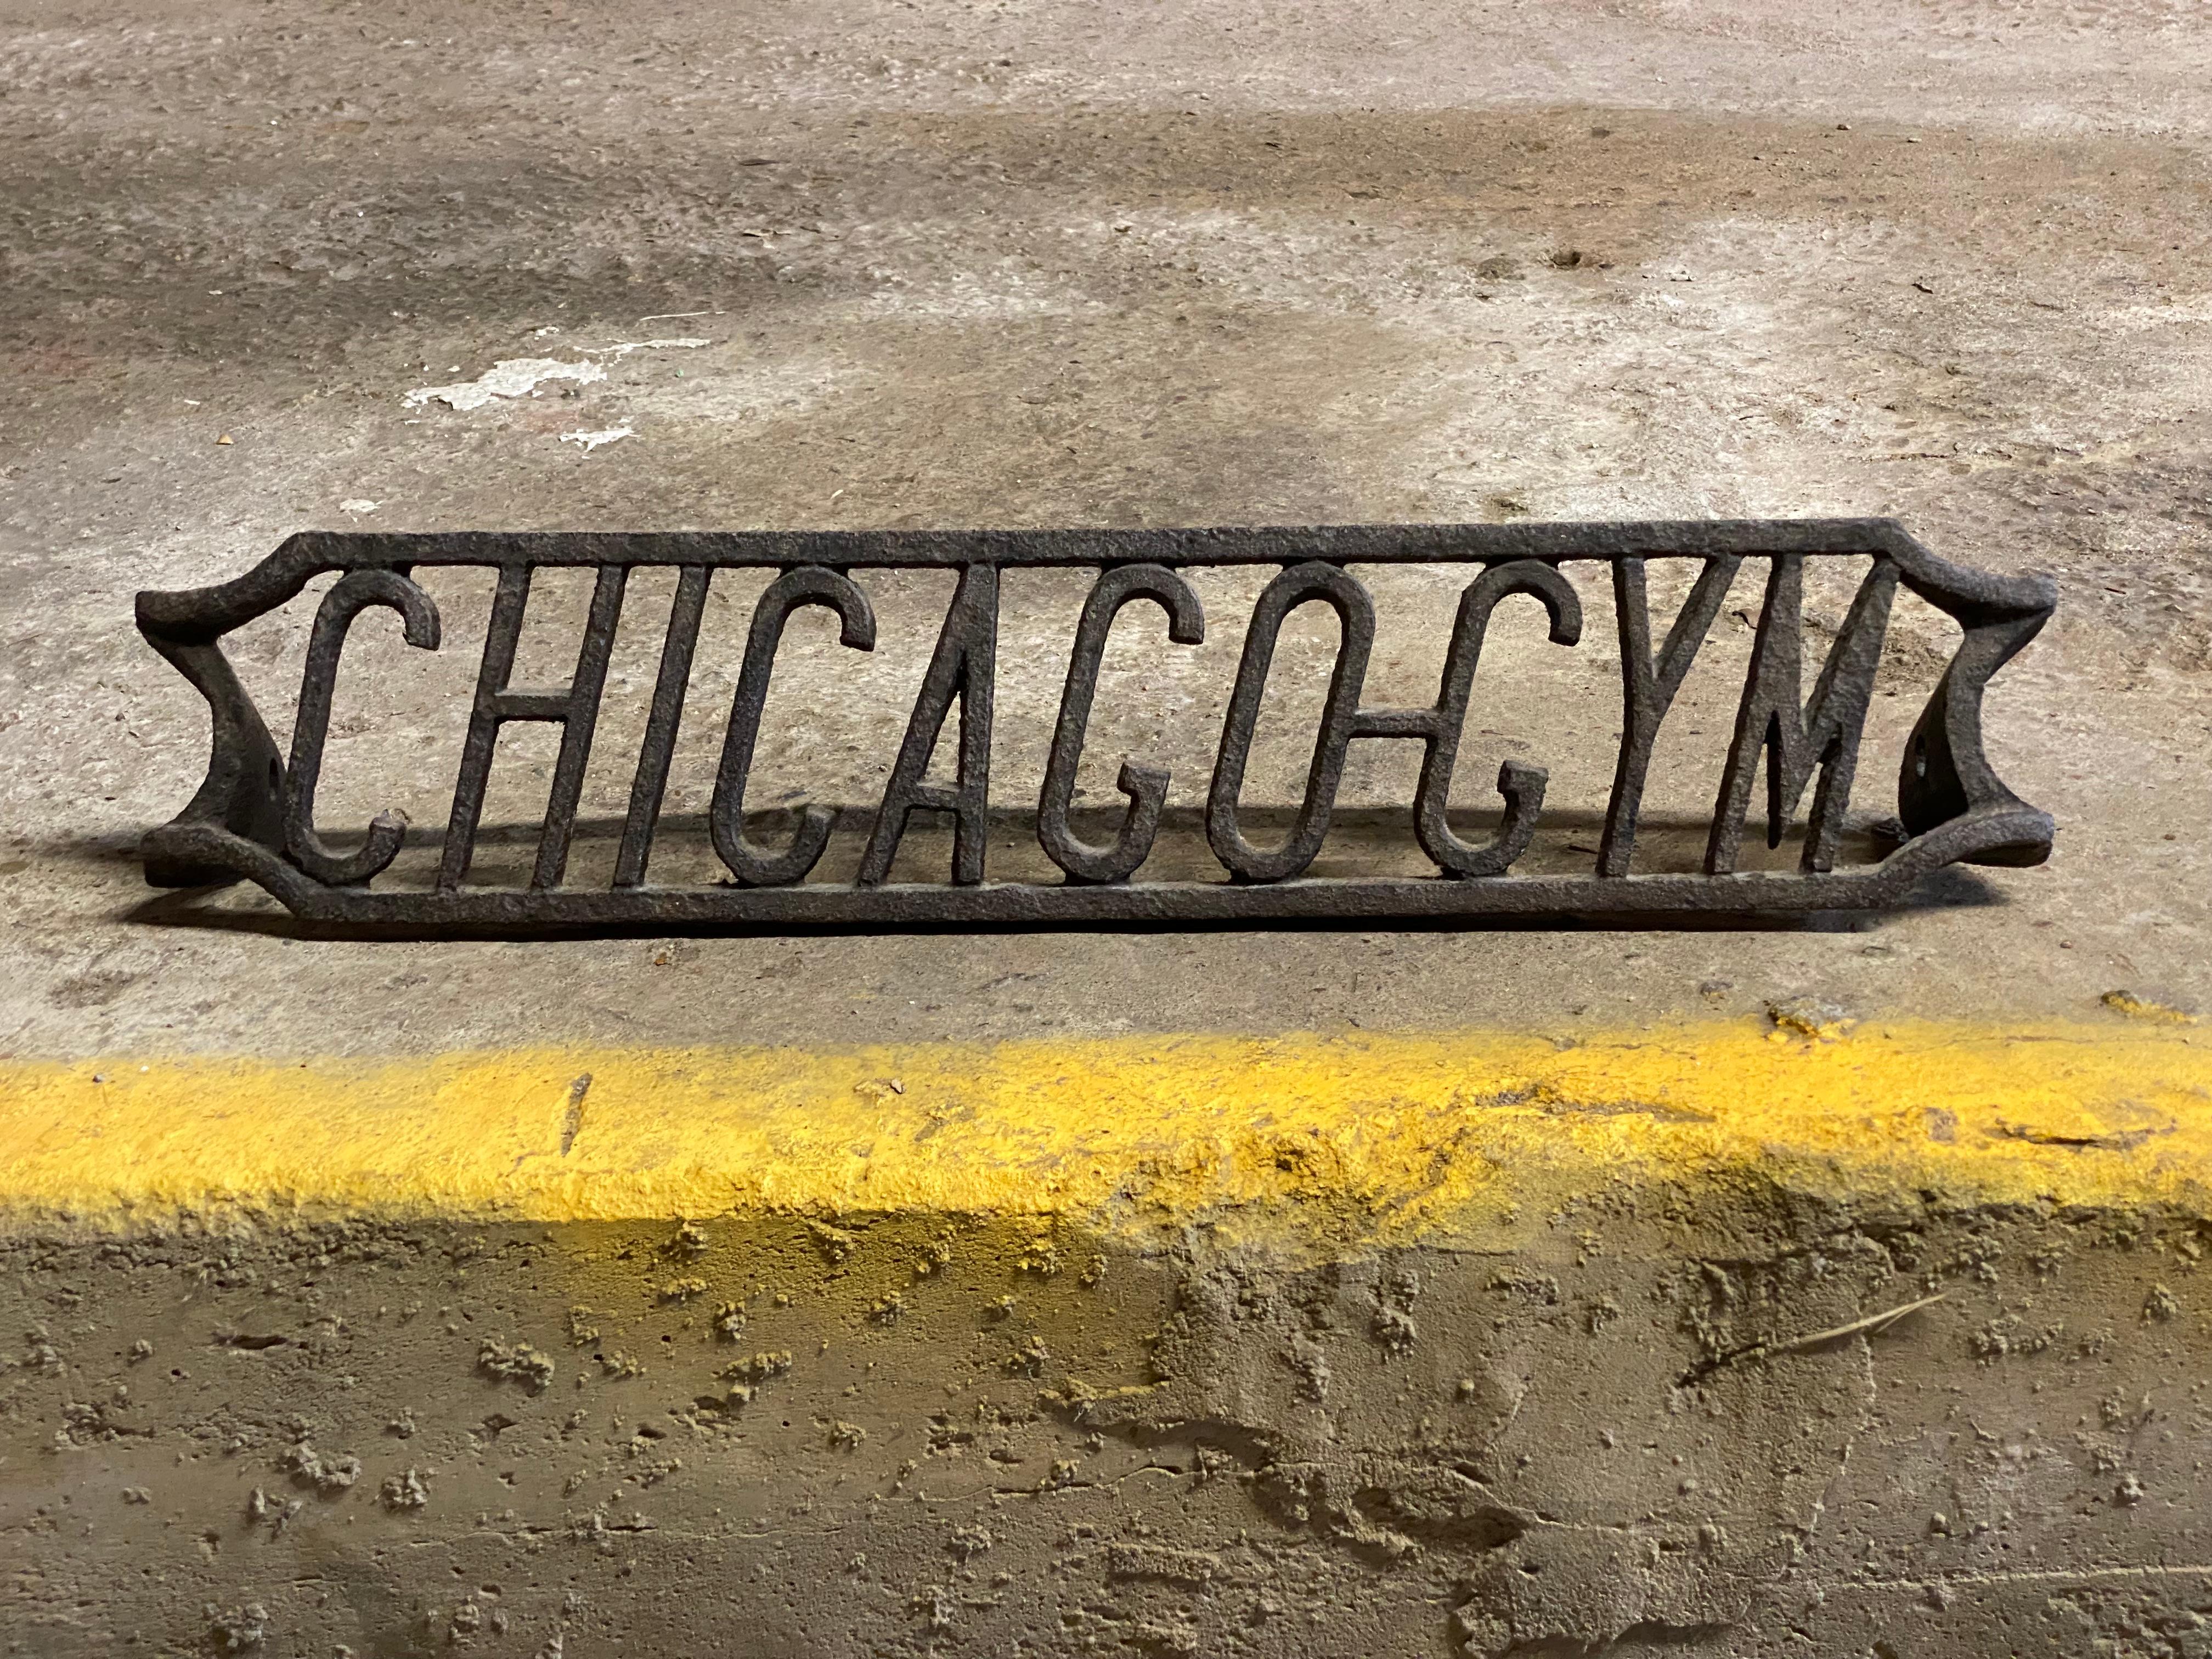 A fine cast iron objet d'art fragment from Chicago Gym. Black iron step or rung from a ladder. Circa 1930-40. Good overall condition. Wear consistent with age and use. Minor roughness.

Measures: Approximately 4